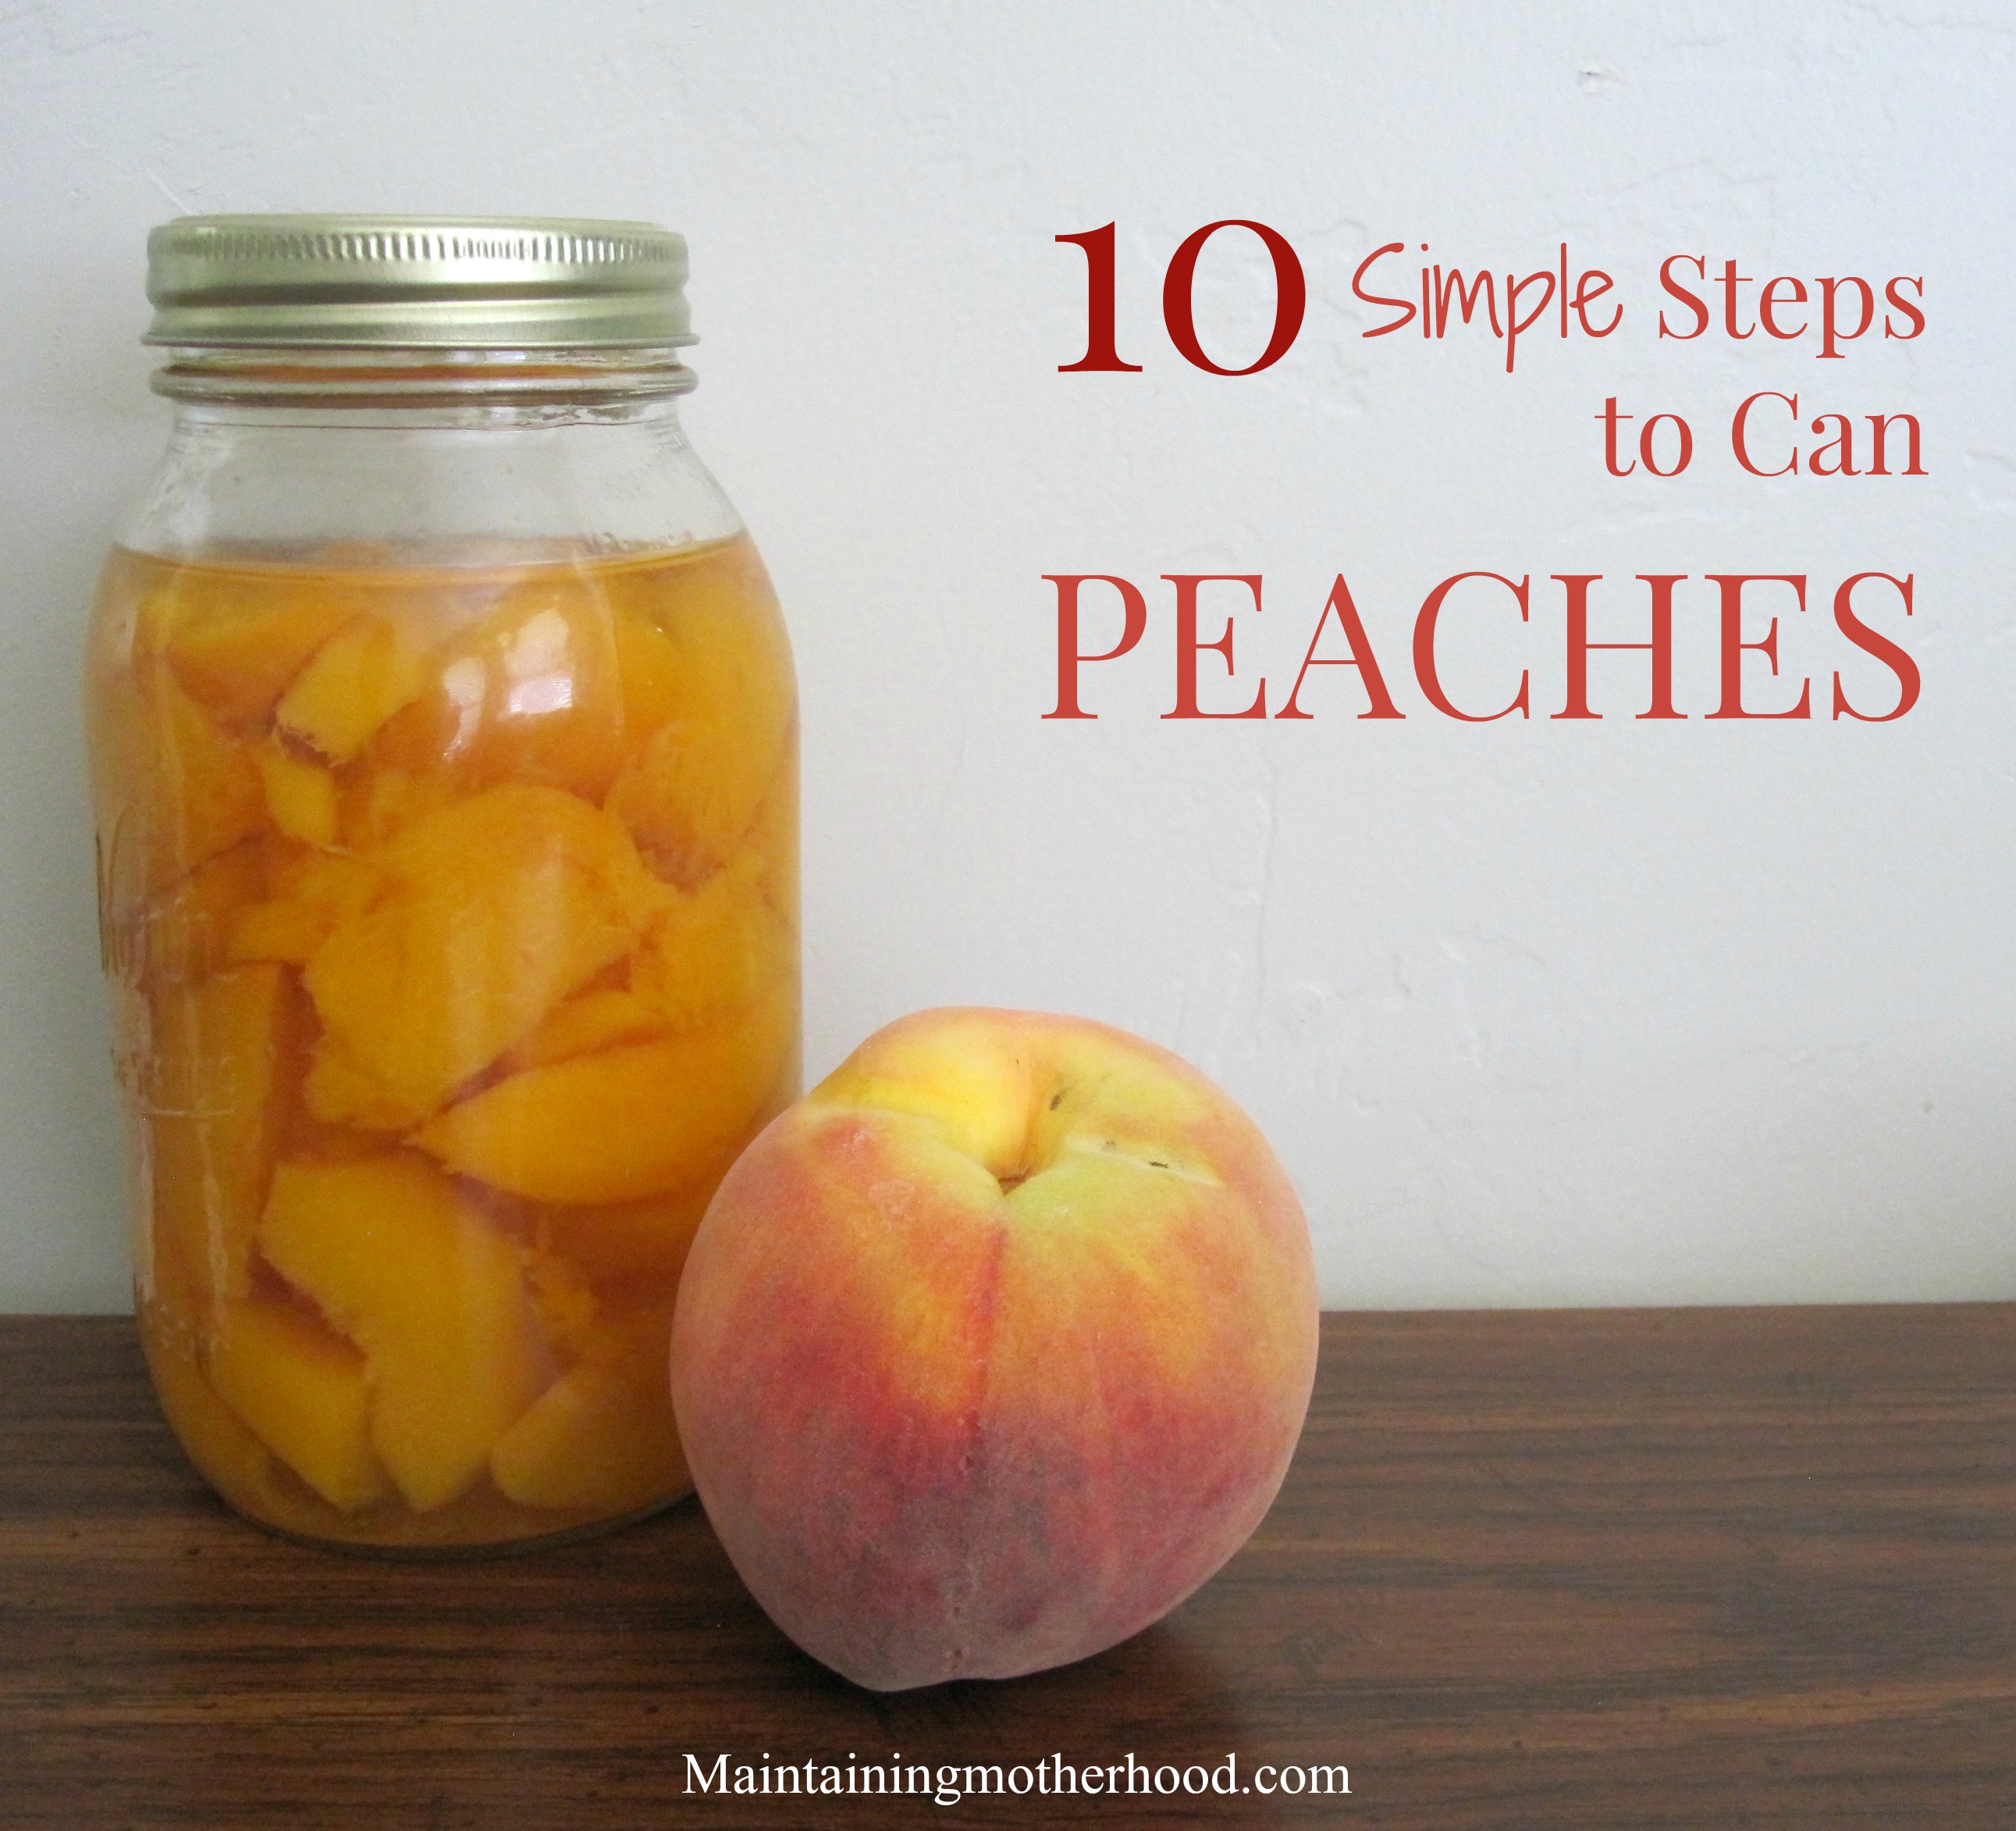 How to Can Peaches in 10 Simple Steps – Maintaining Motherhood